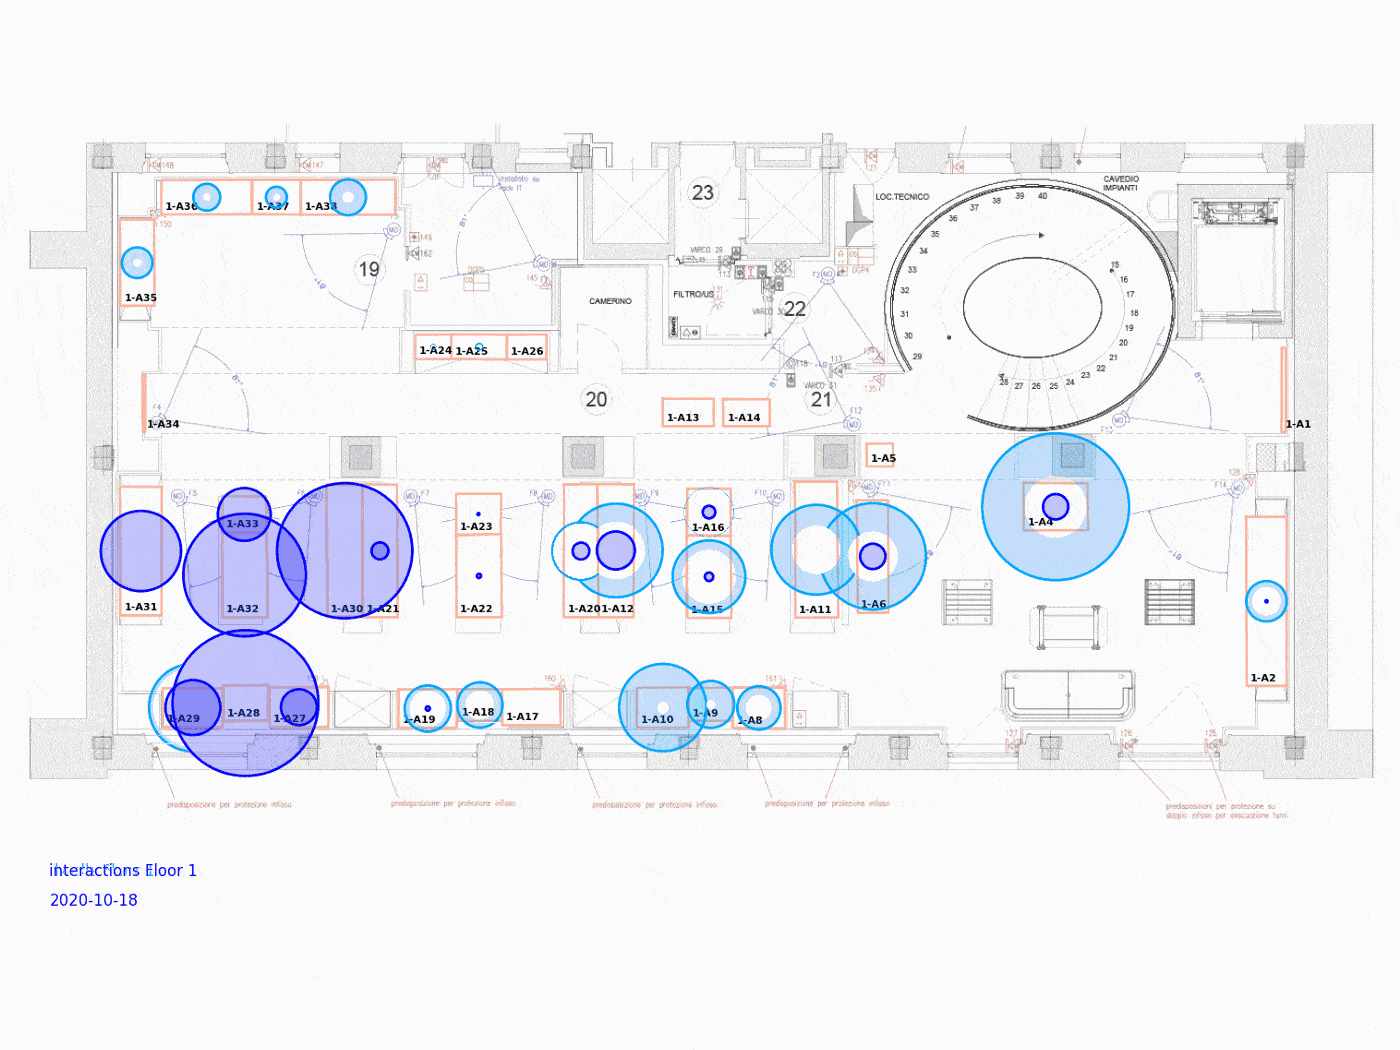 Animated image showing shopper behavior and retail floor plan.